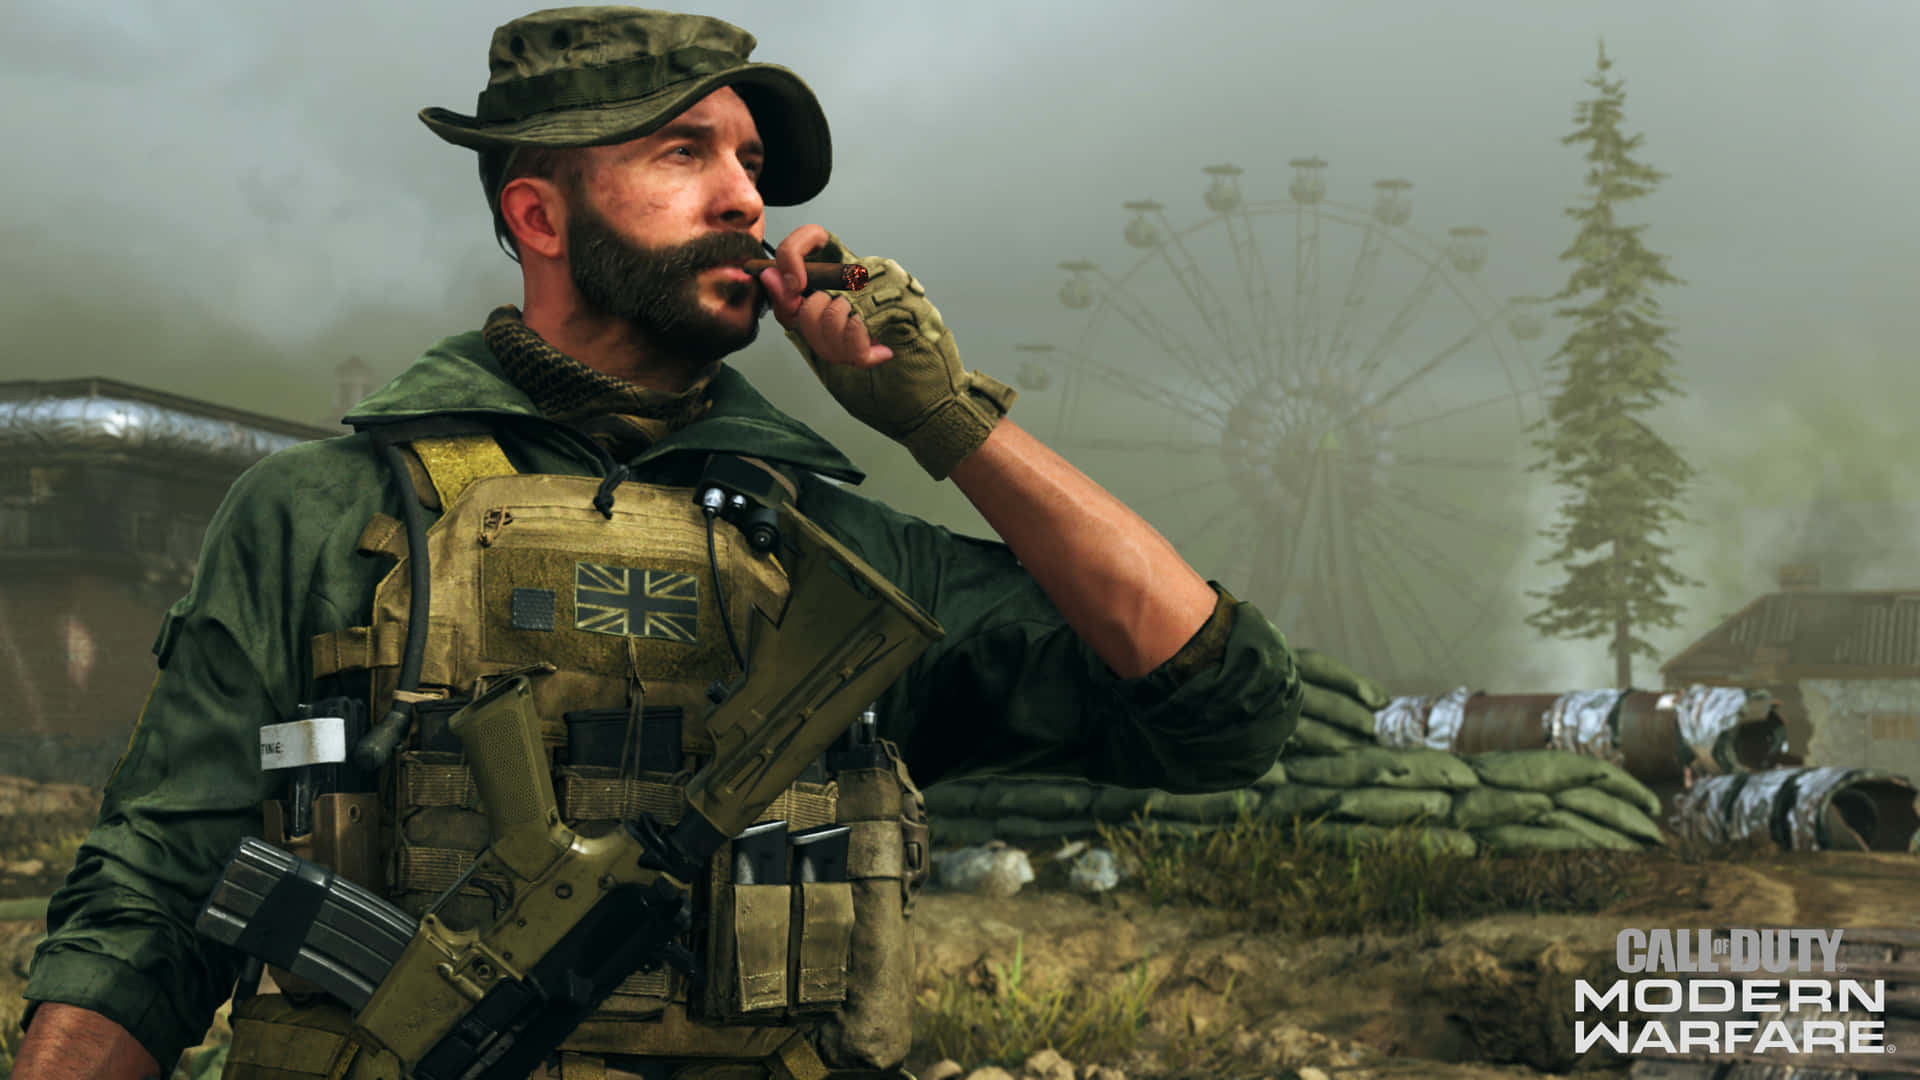 Experience the Epic Shooter Thriller with Call of Duty: Modern Warfare